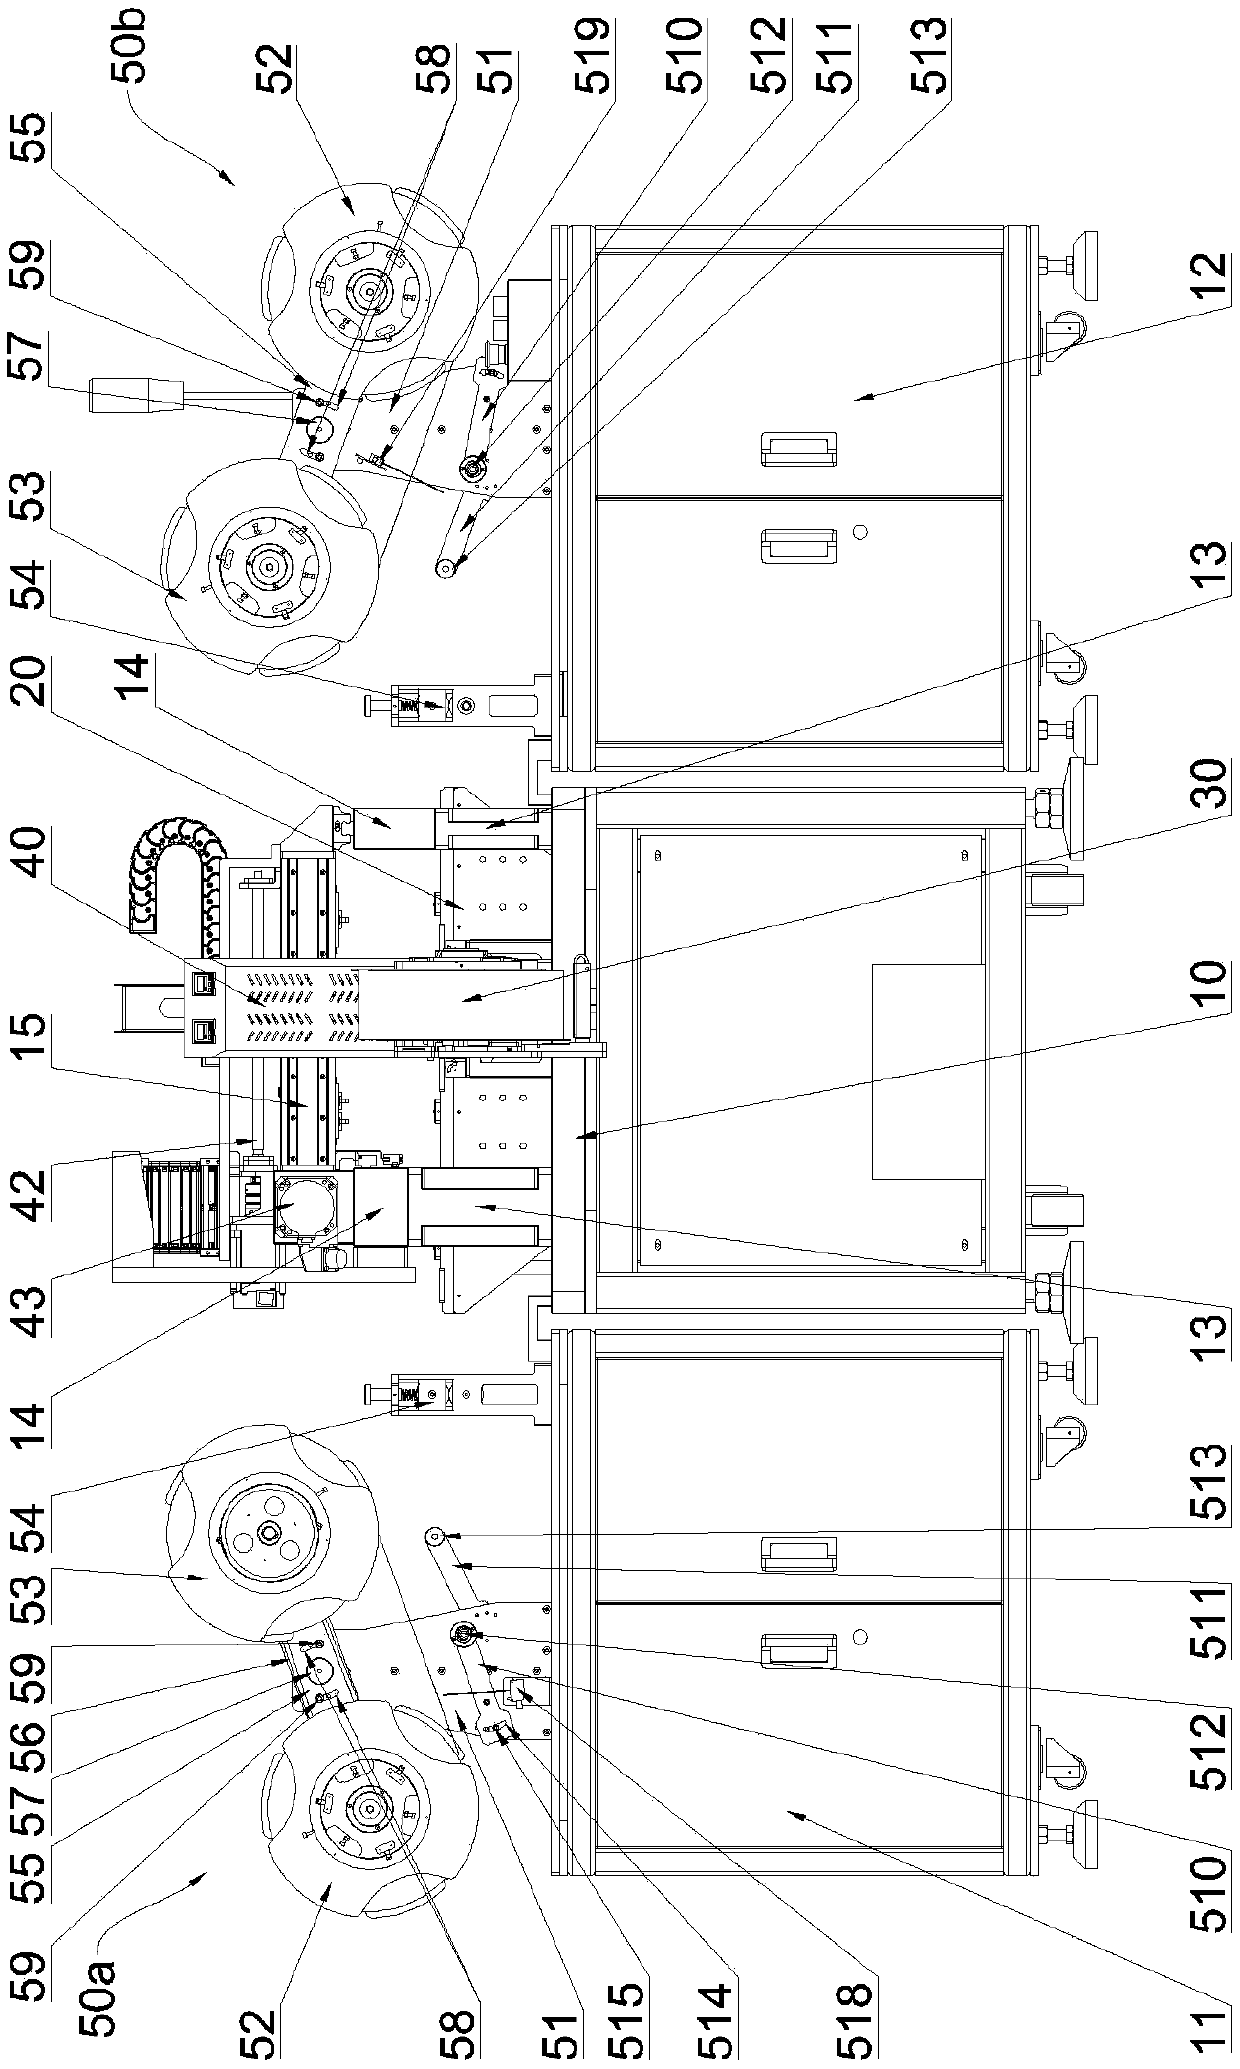 Full-automatic mounting system of tape-type flaky electronic components